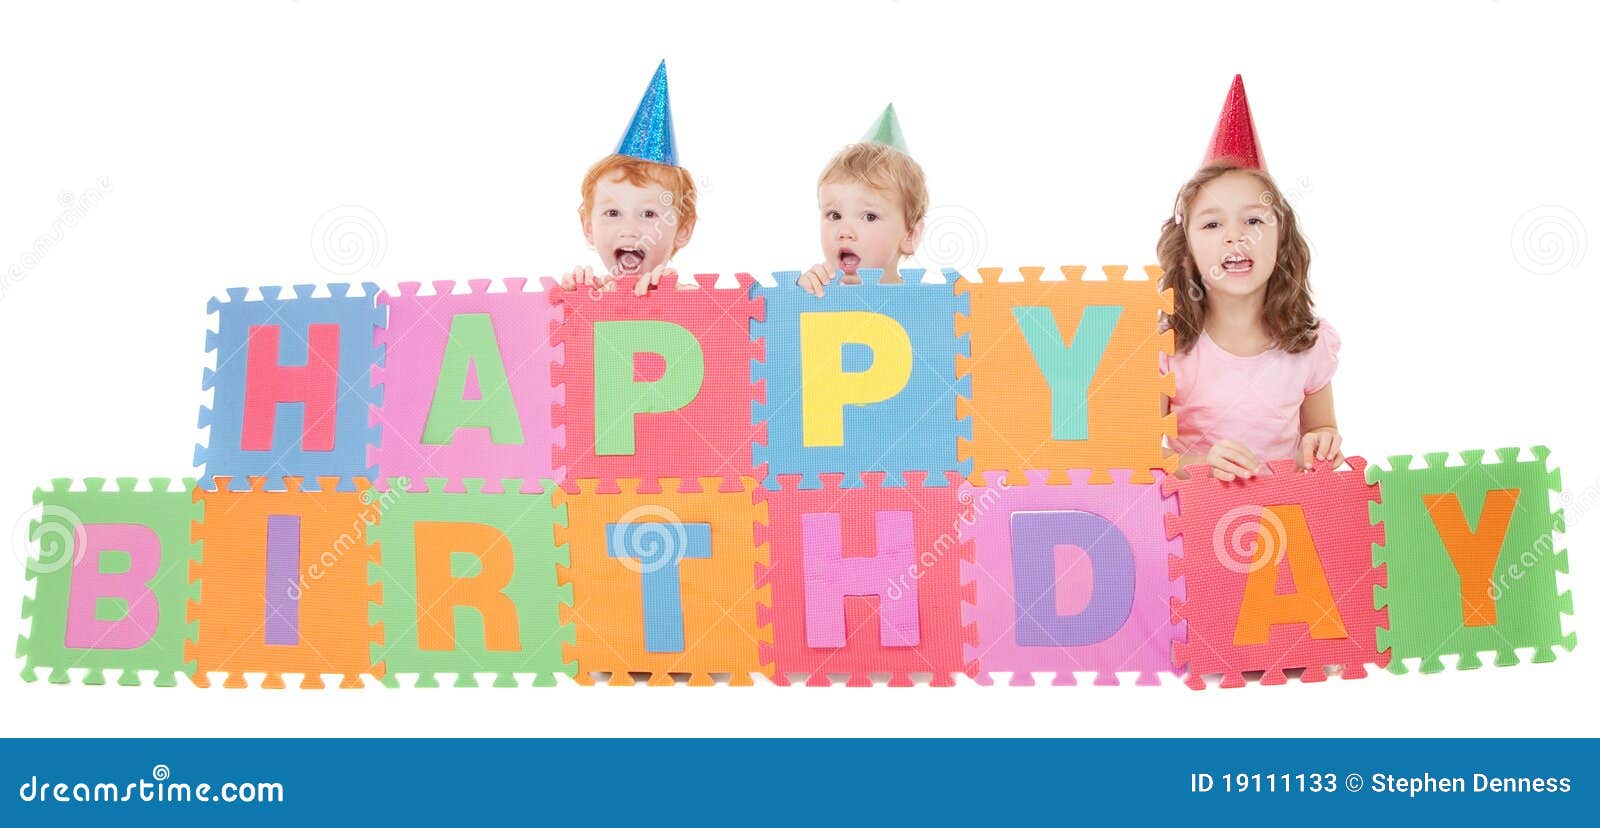 Top 999+ happy birthday images for children – Amazing Collection happy ...